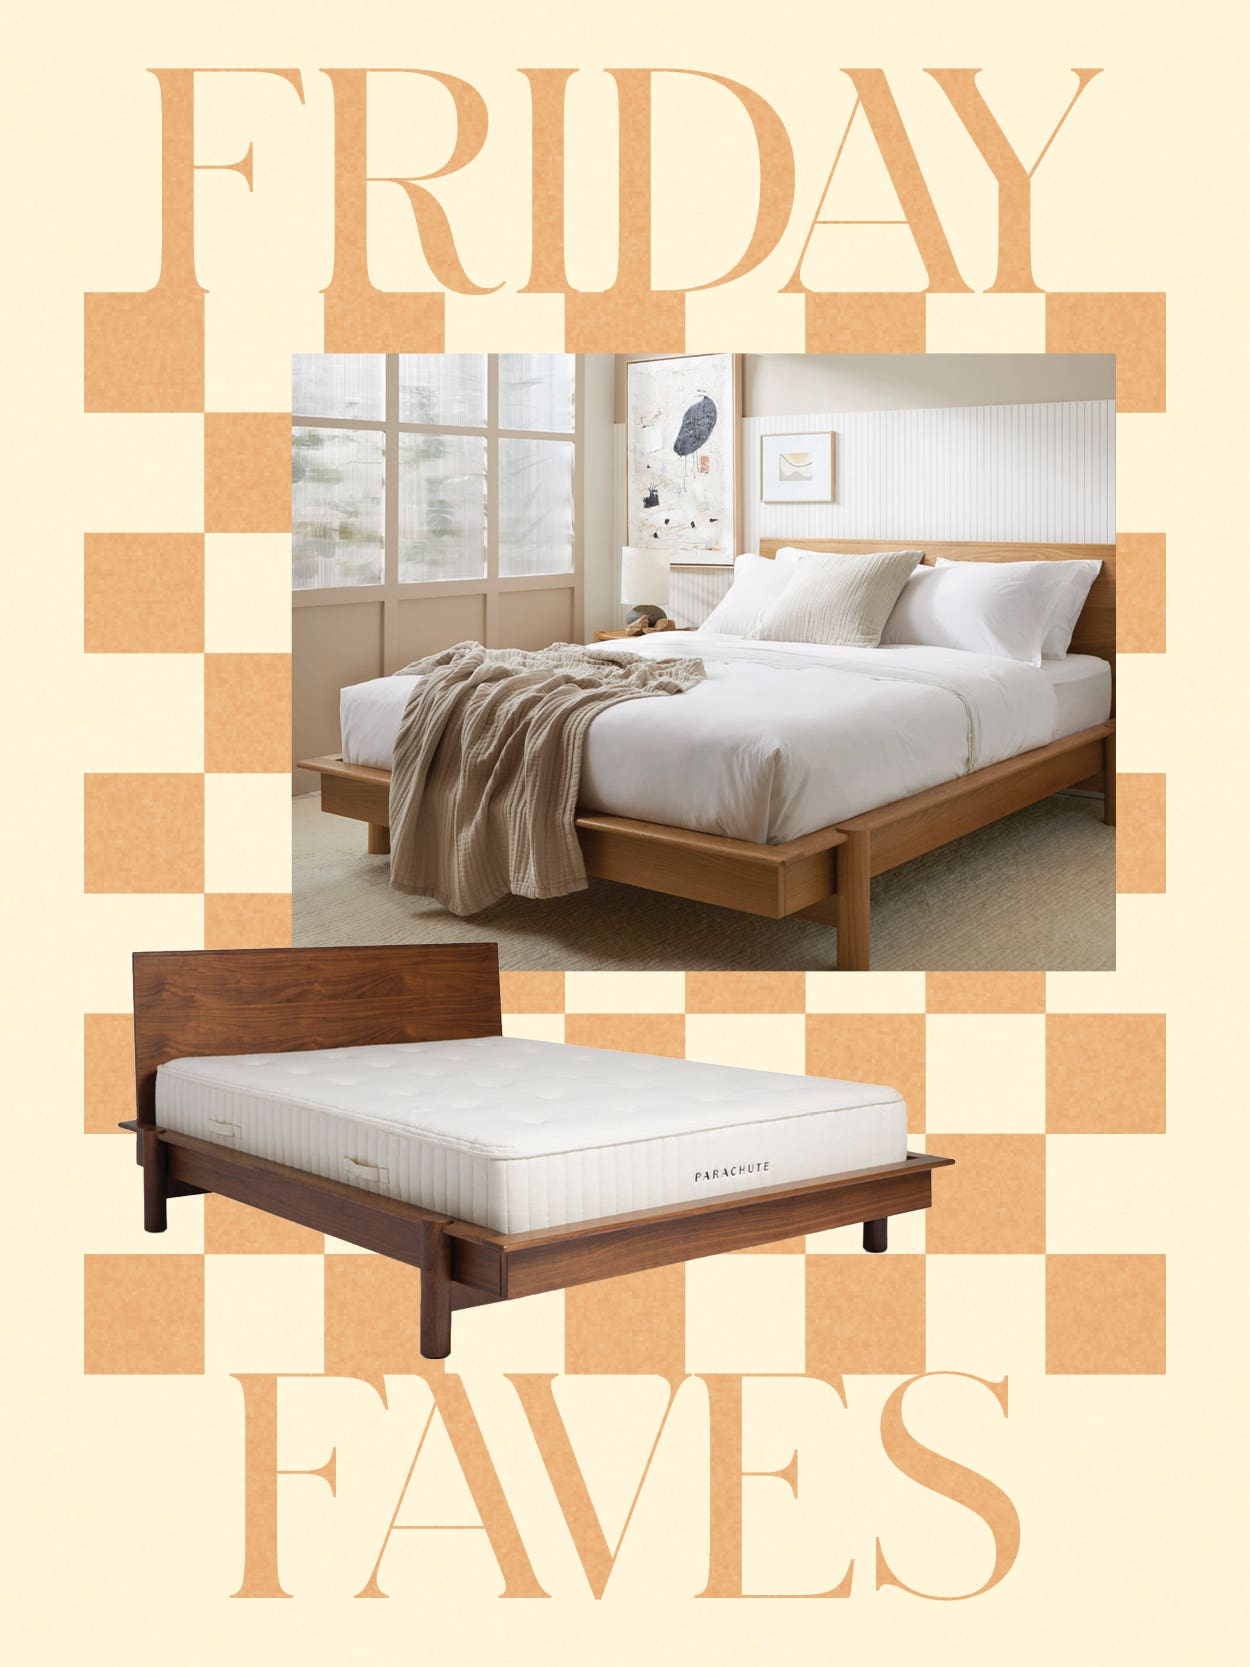 Friday Faves border with Parachute walnut bed frames